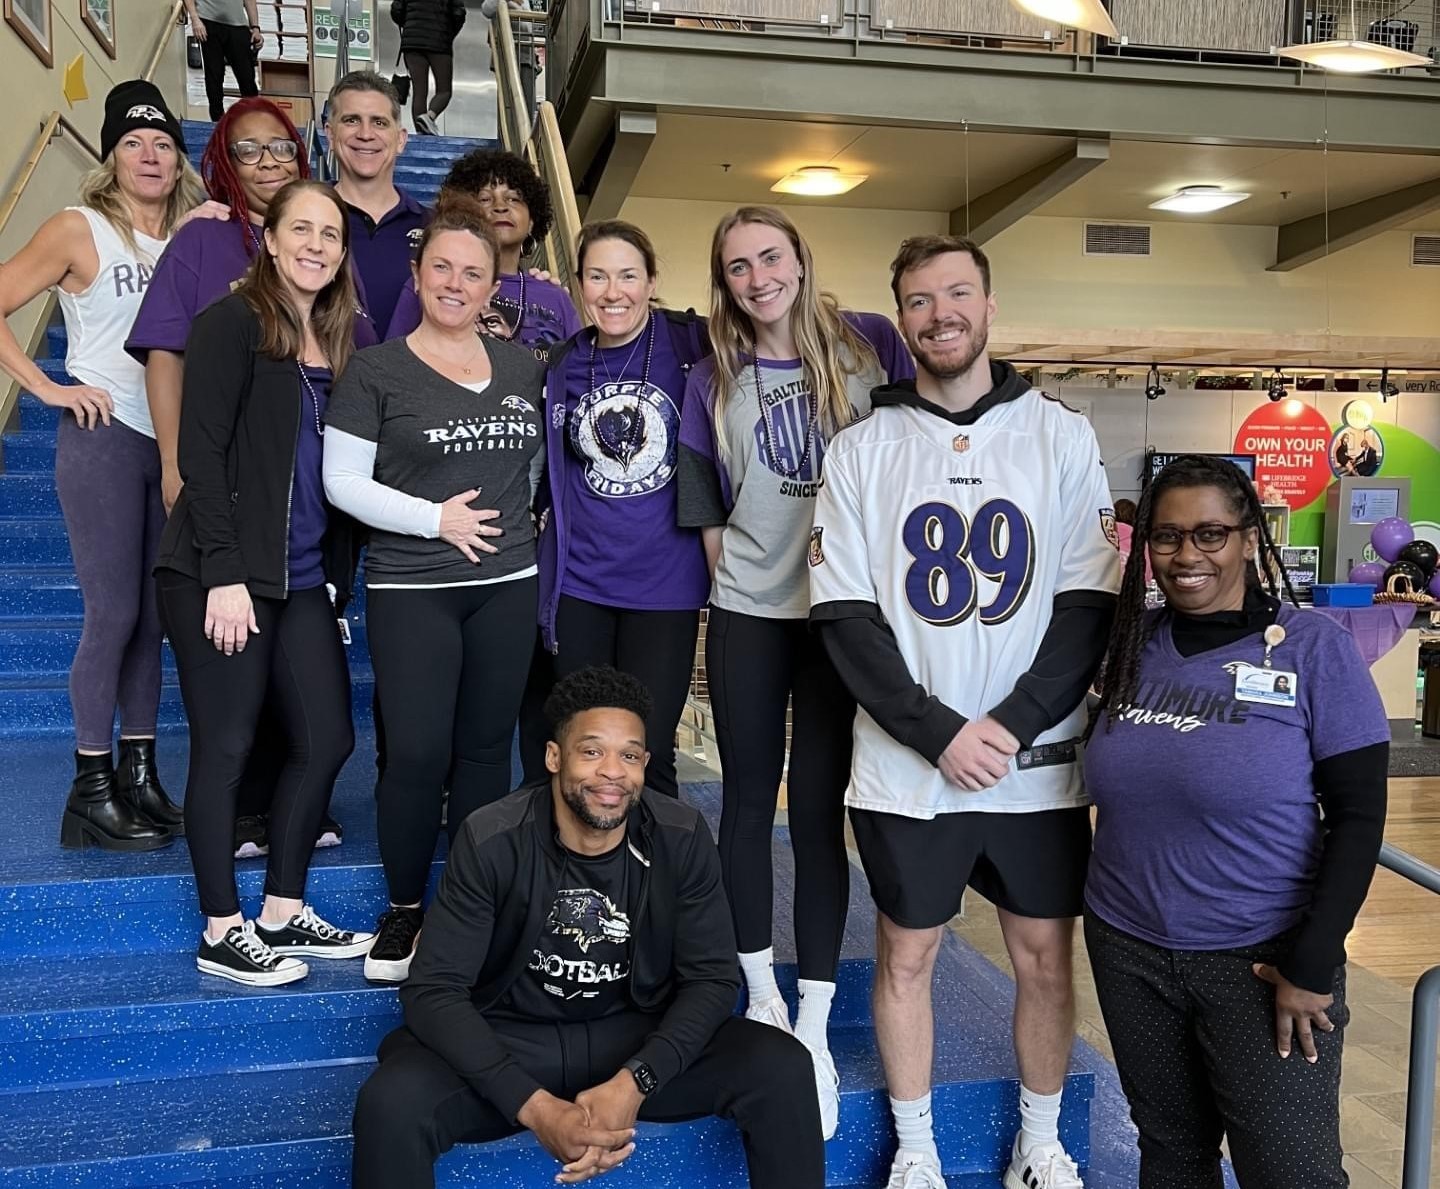 LifeBridge Health & Fitness team members celebrate Purple Friday and the Raven's  AFC North Championship